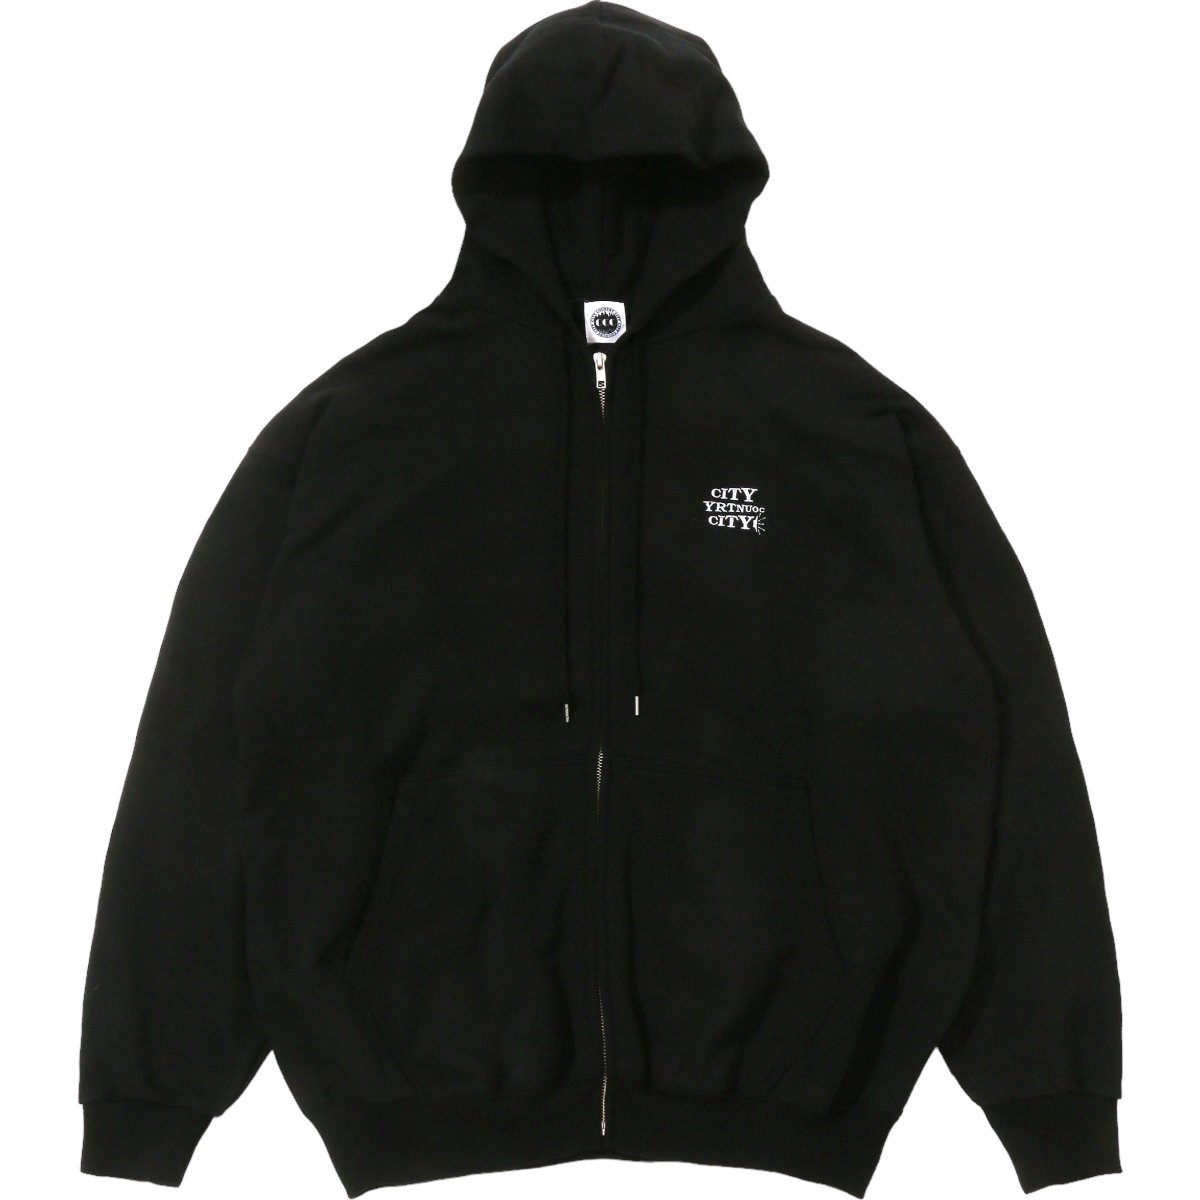 CITY COUNTRY CITY<BR>EMBROIDERED LOGO ZIP UP COTTON HOODIE"SOUND CITY COUNTRY CITY"(BLACK)